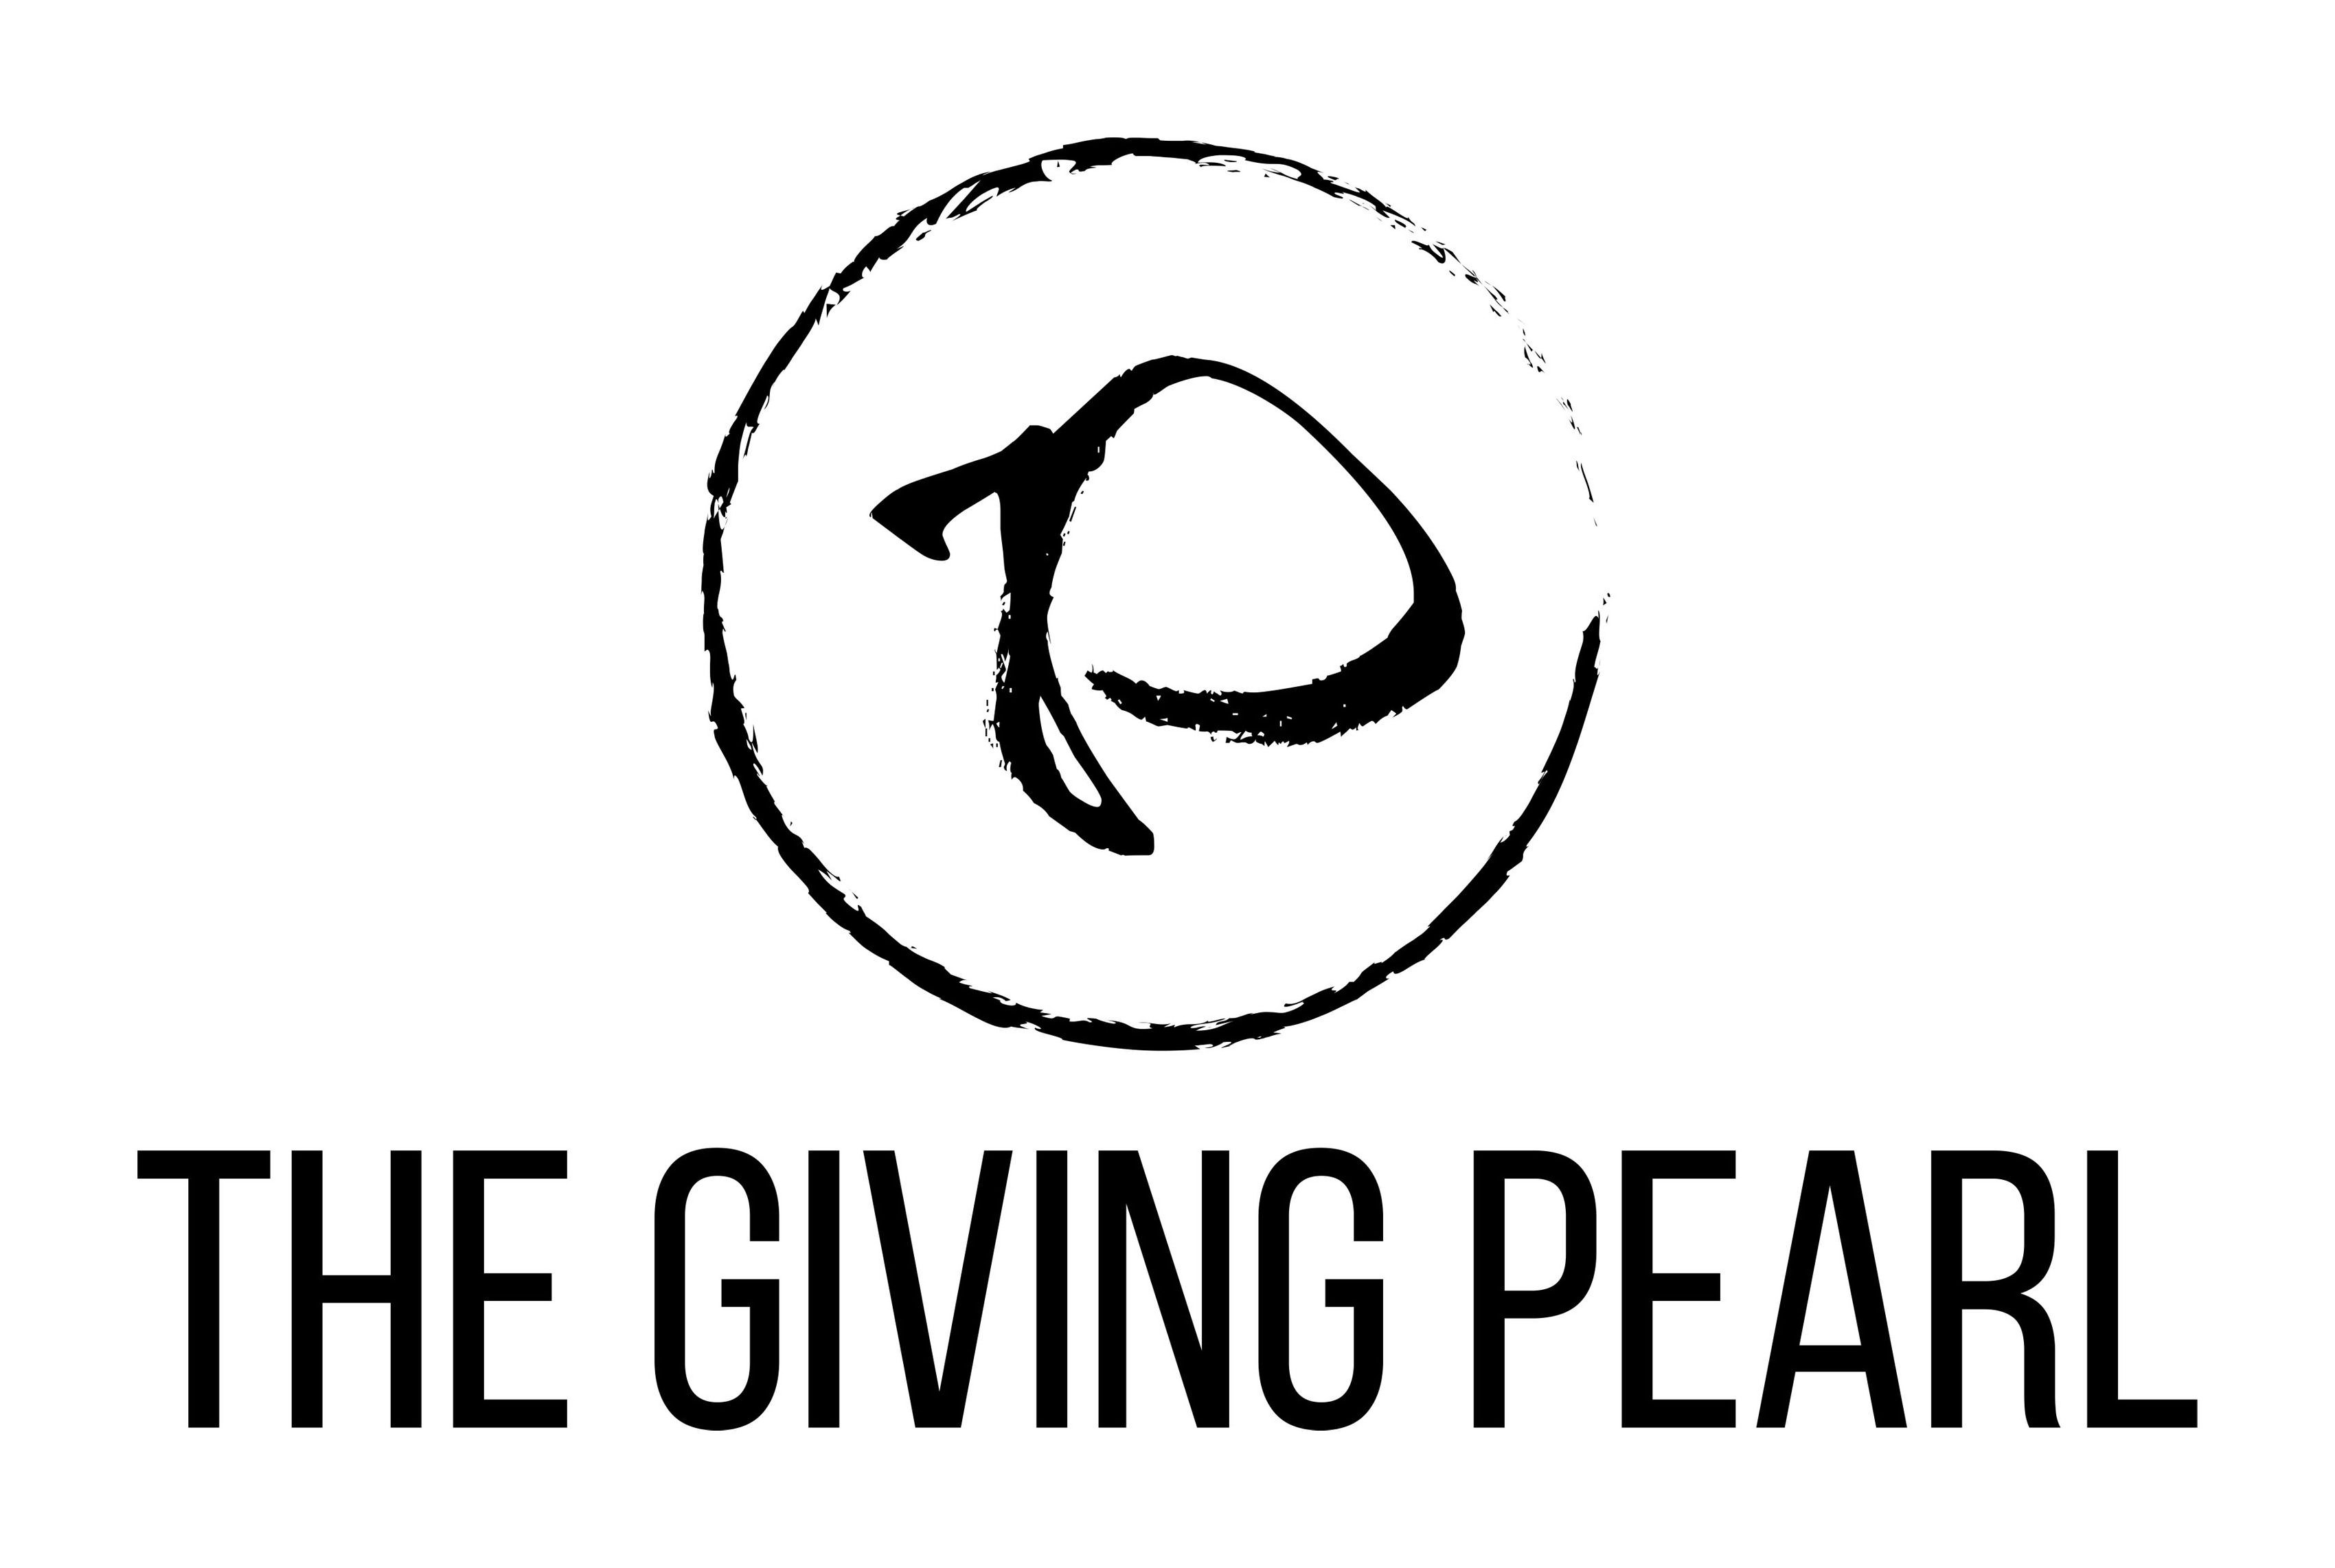  P THE GIVING PEARL